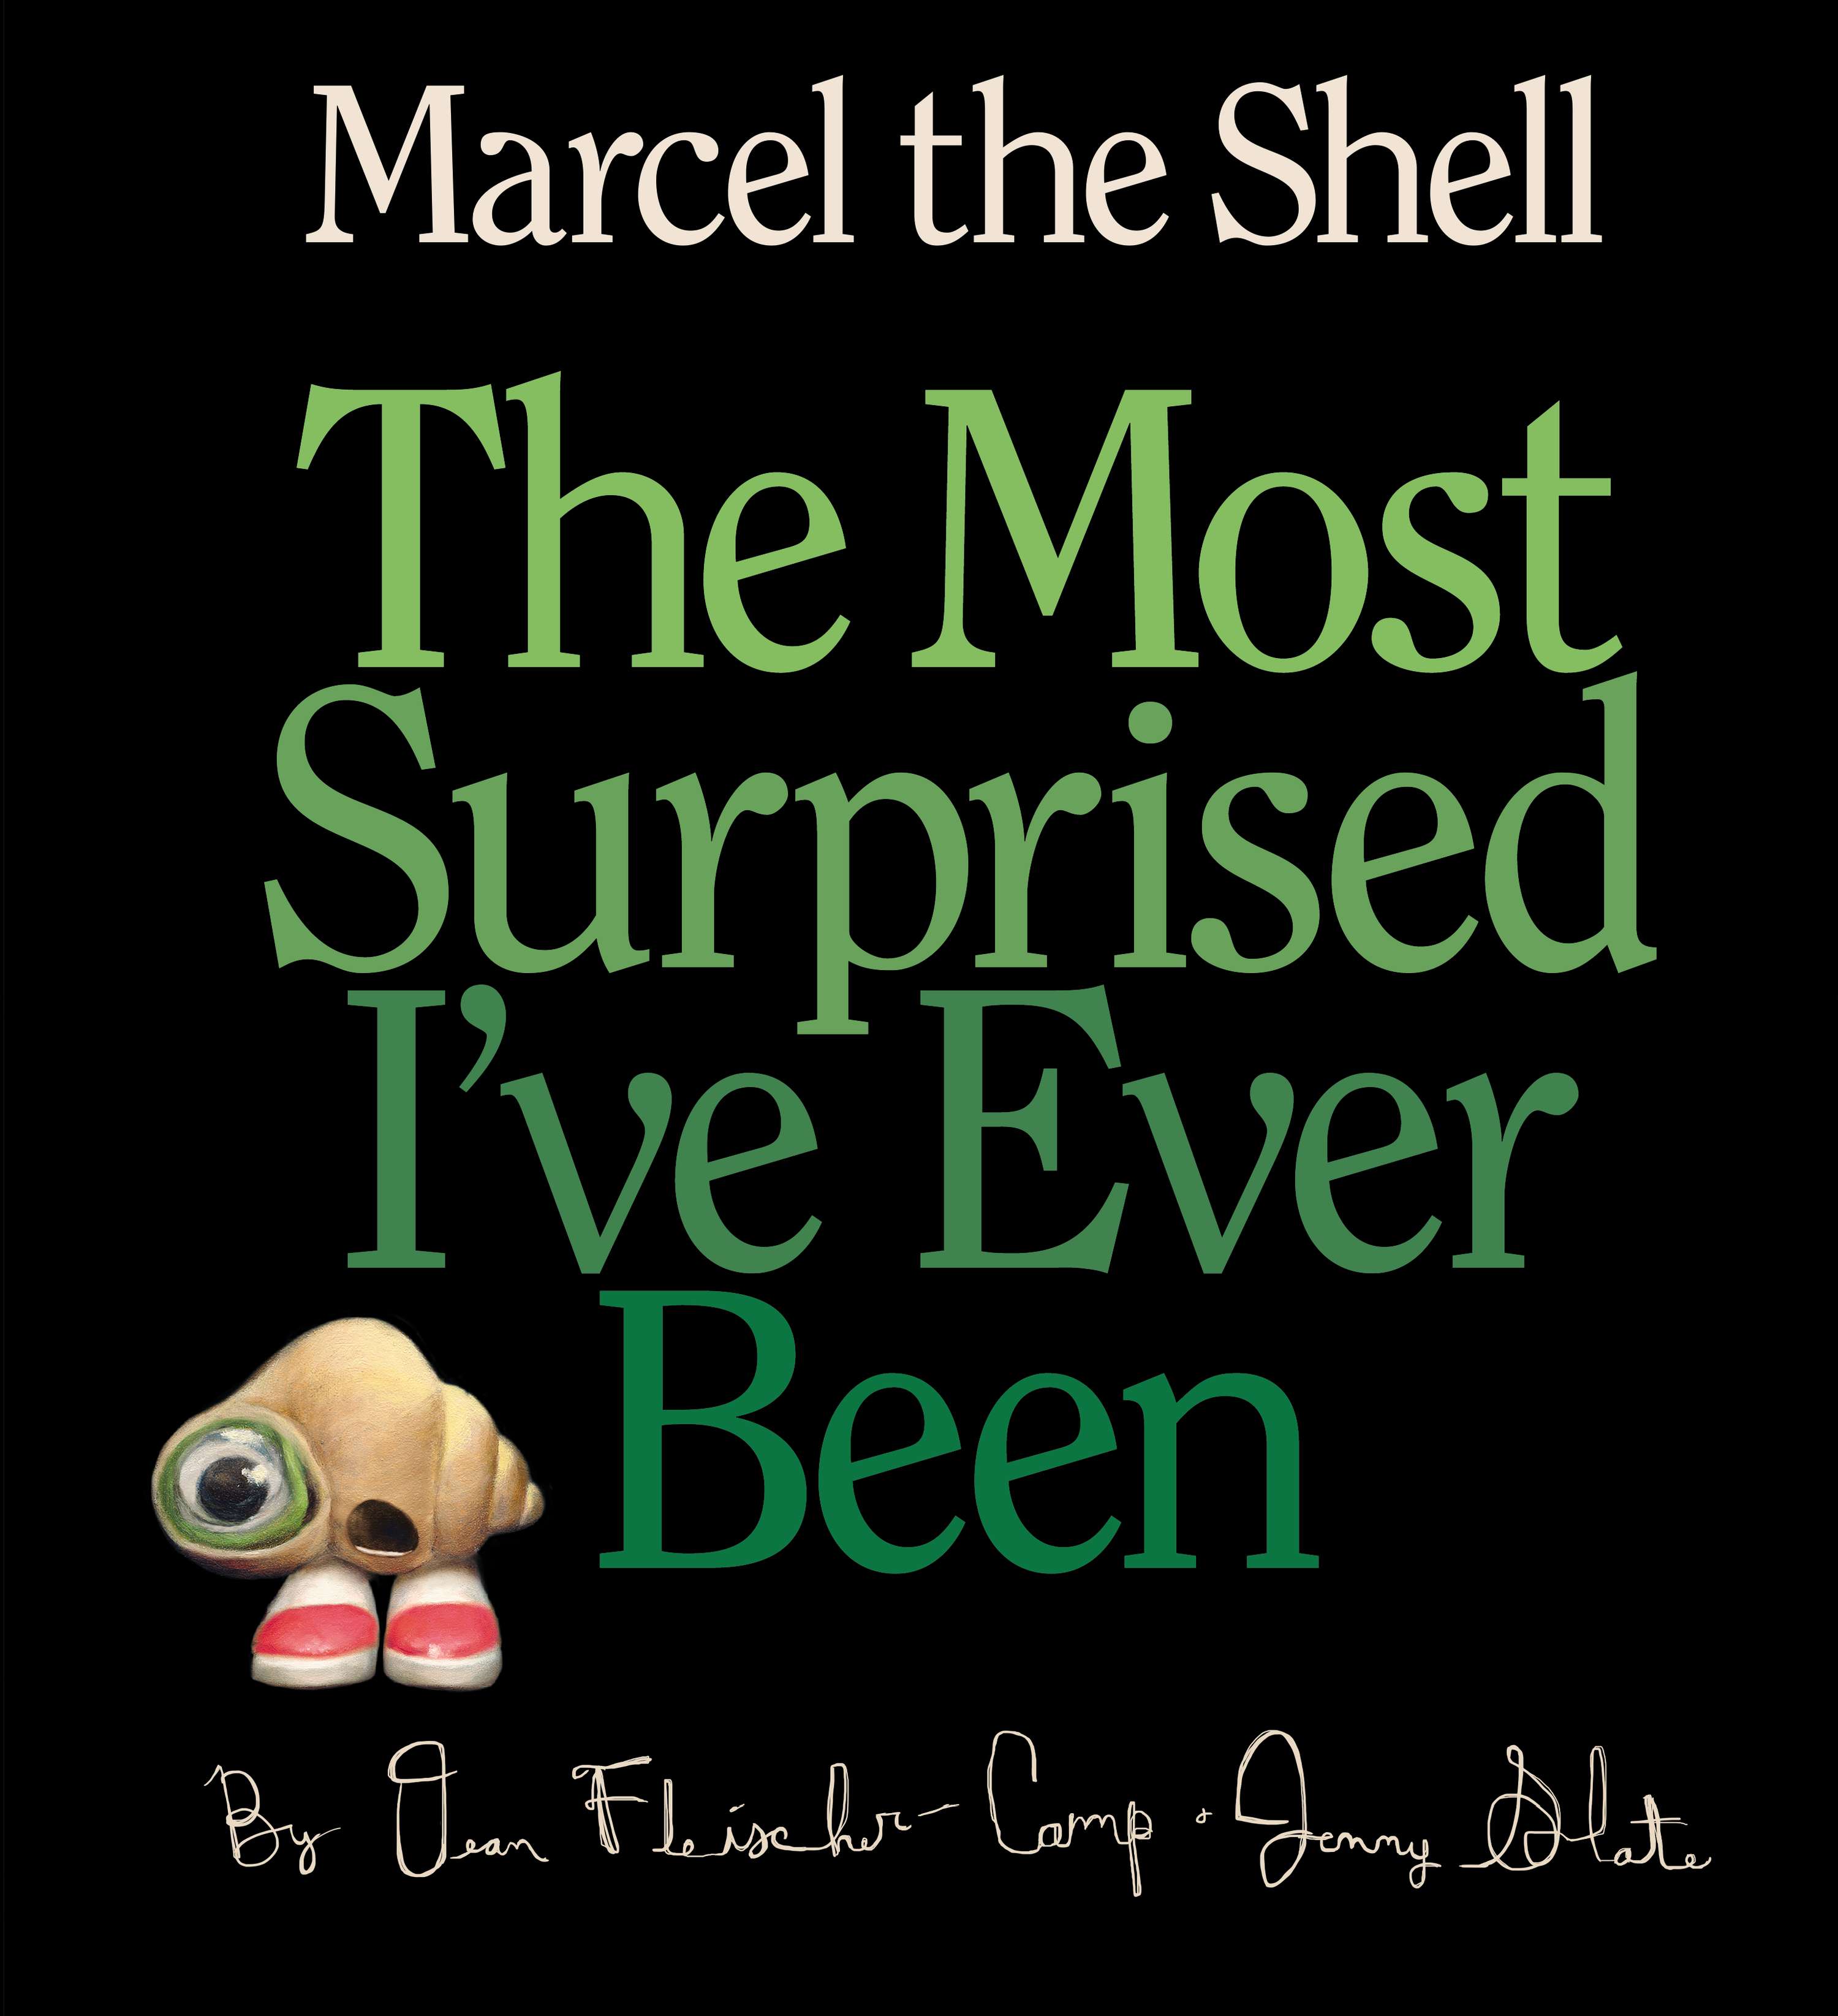 Viral YouTube Sensation Marcel the Shell Embarks on New Adventures in